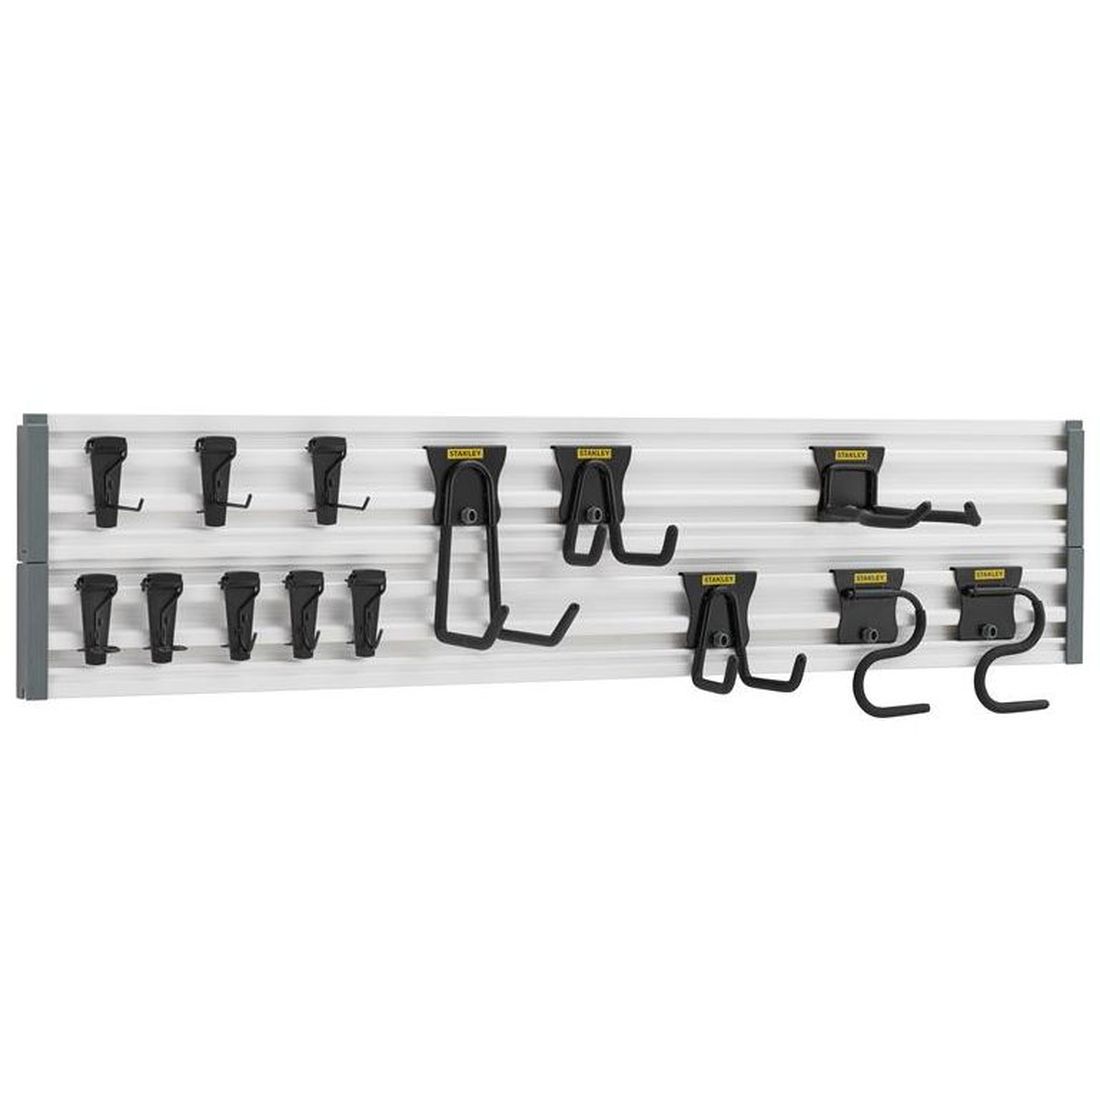 STANLEY Track Wall System Starter Kit, 20 Piece                                         